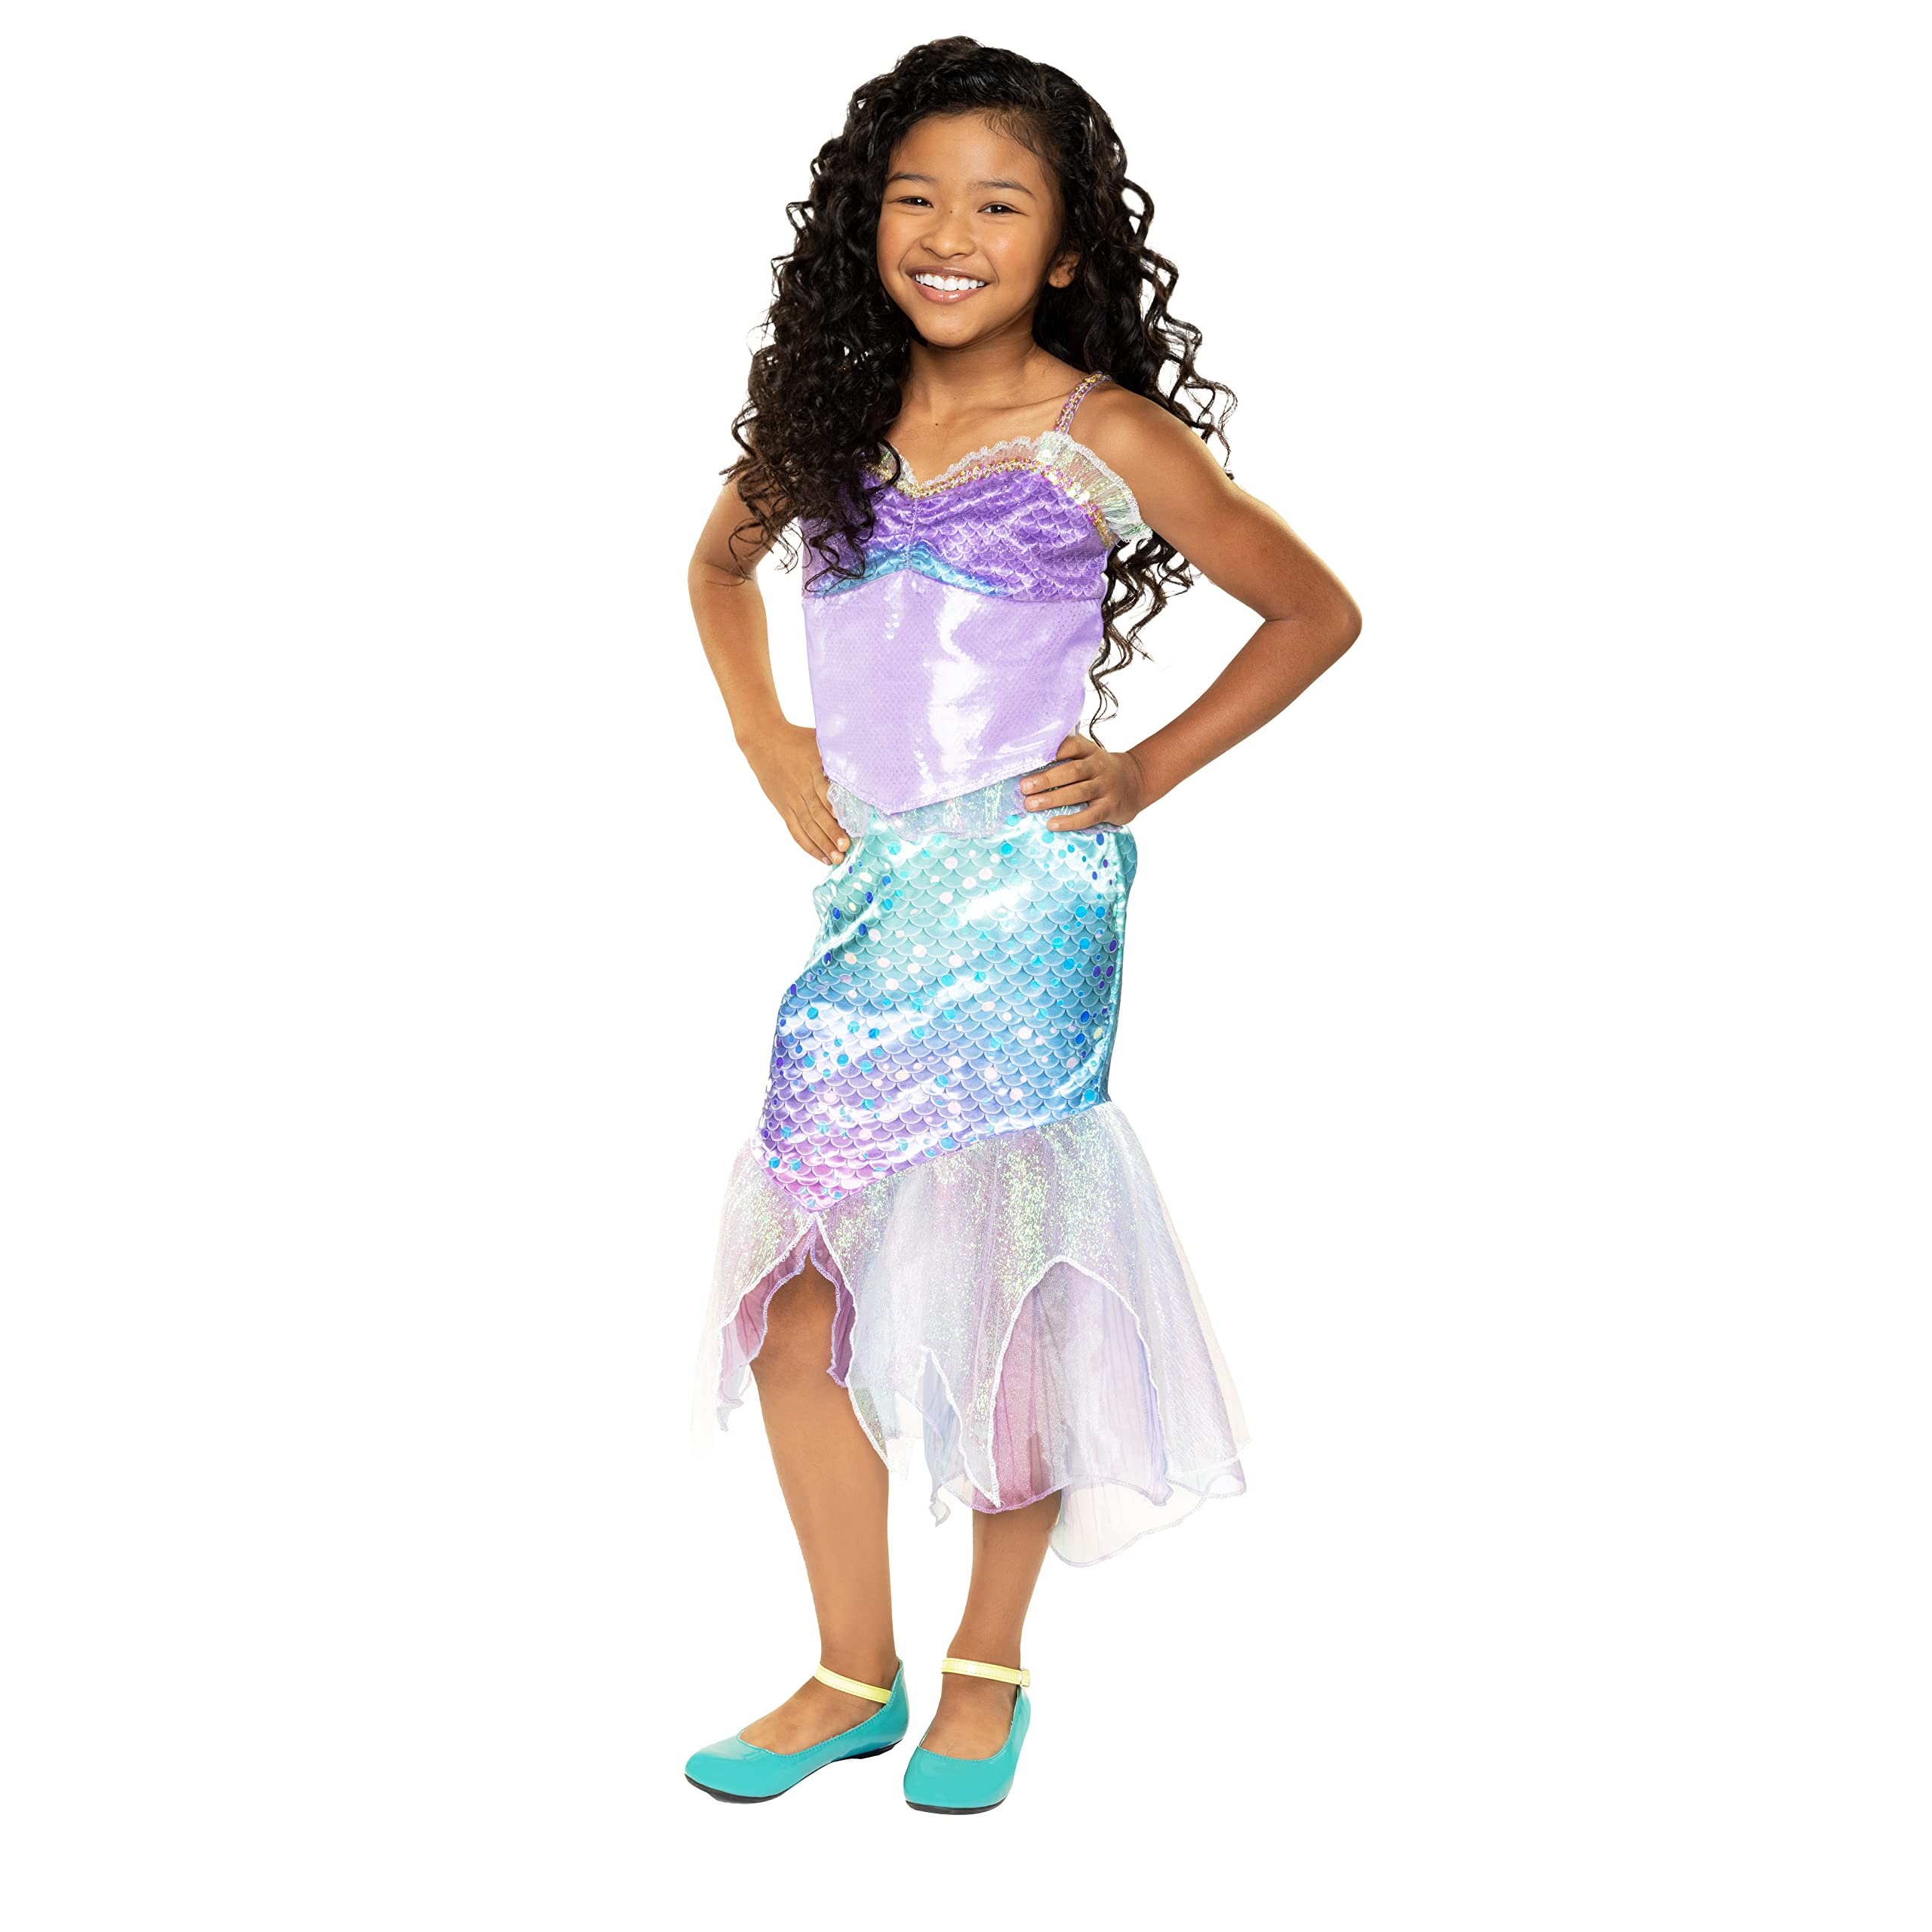 2-Piece Disney The Little Mermaid Ariel’s Top & Skirt Outfit $8.10 + Free Shipping w/ Prime or on $35+